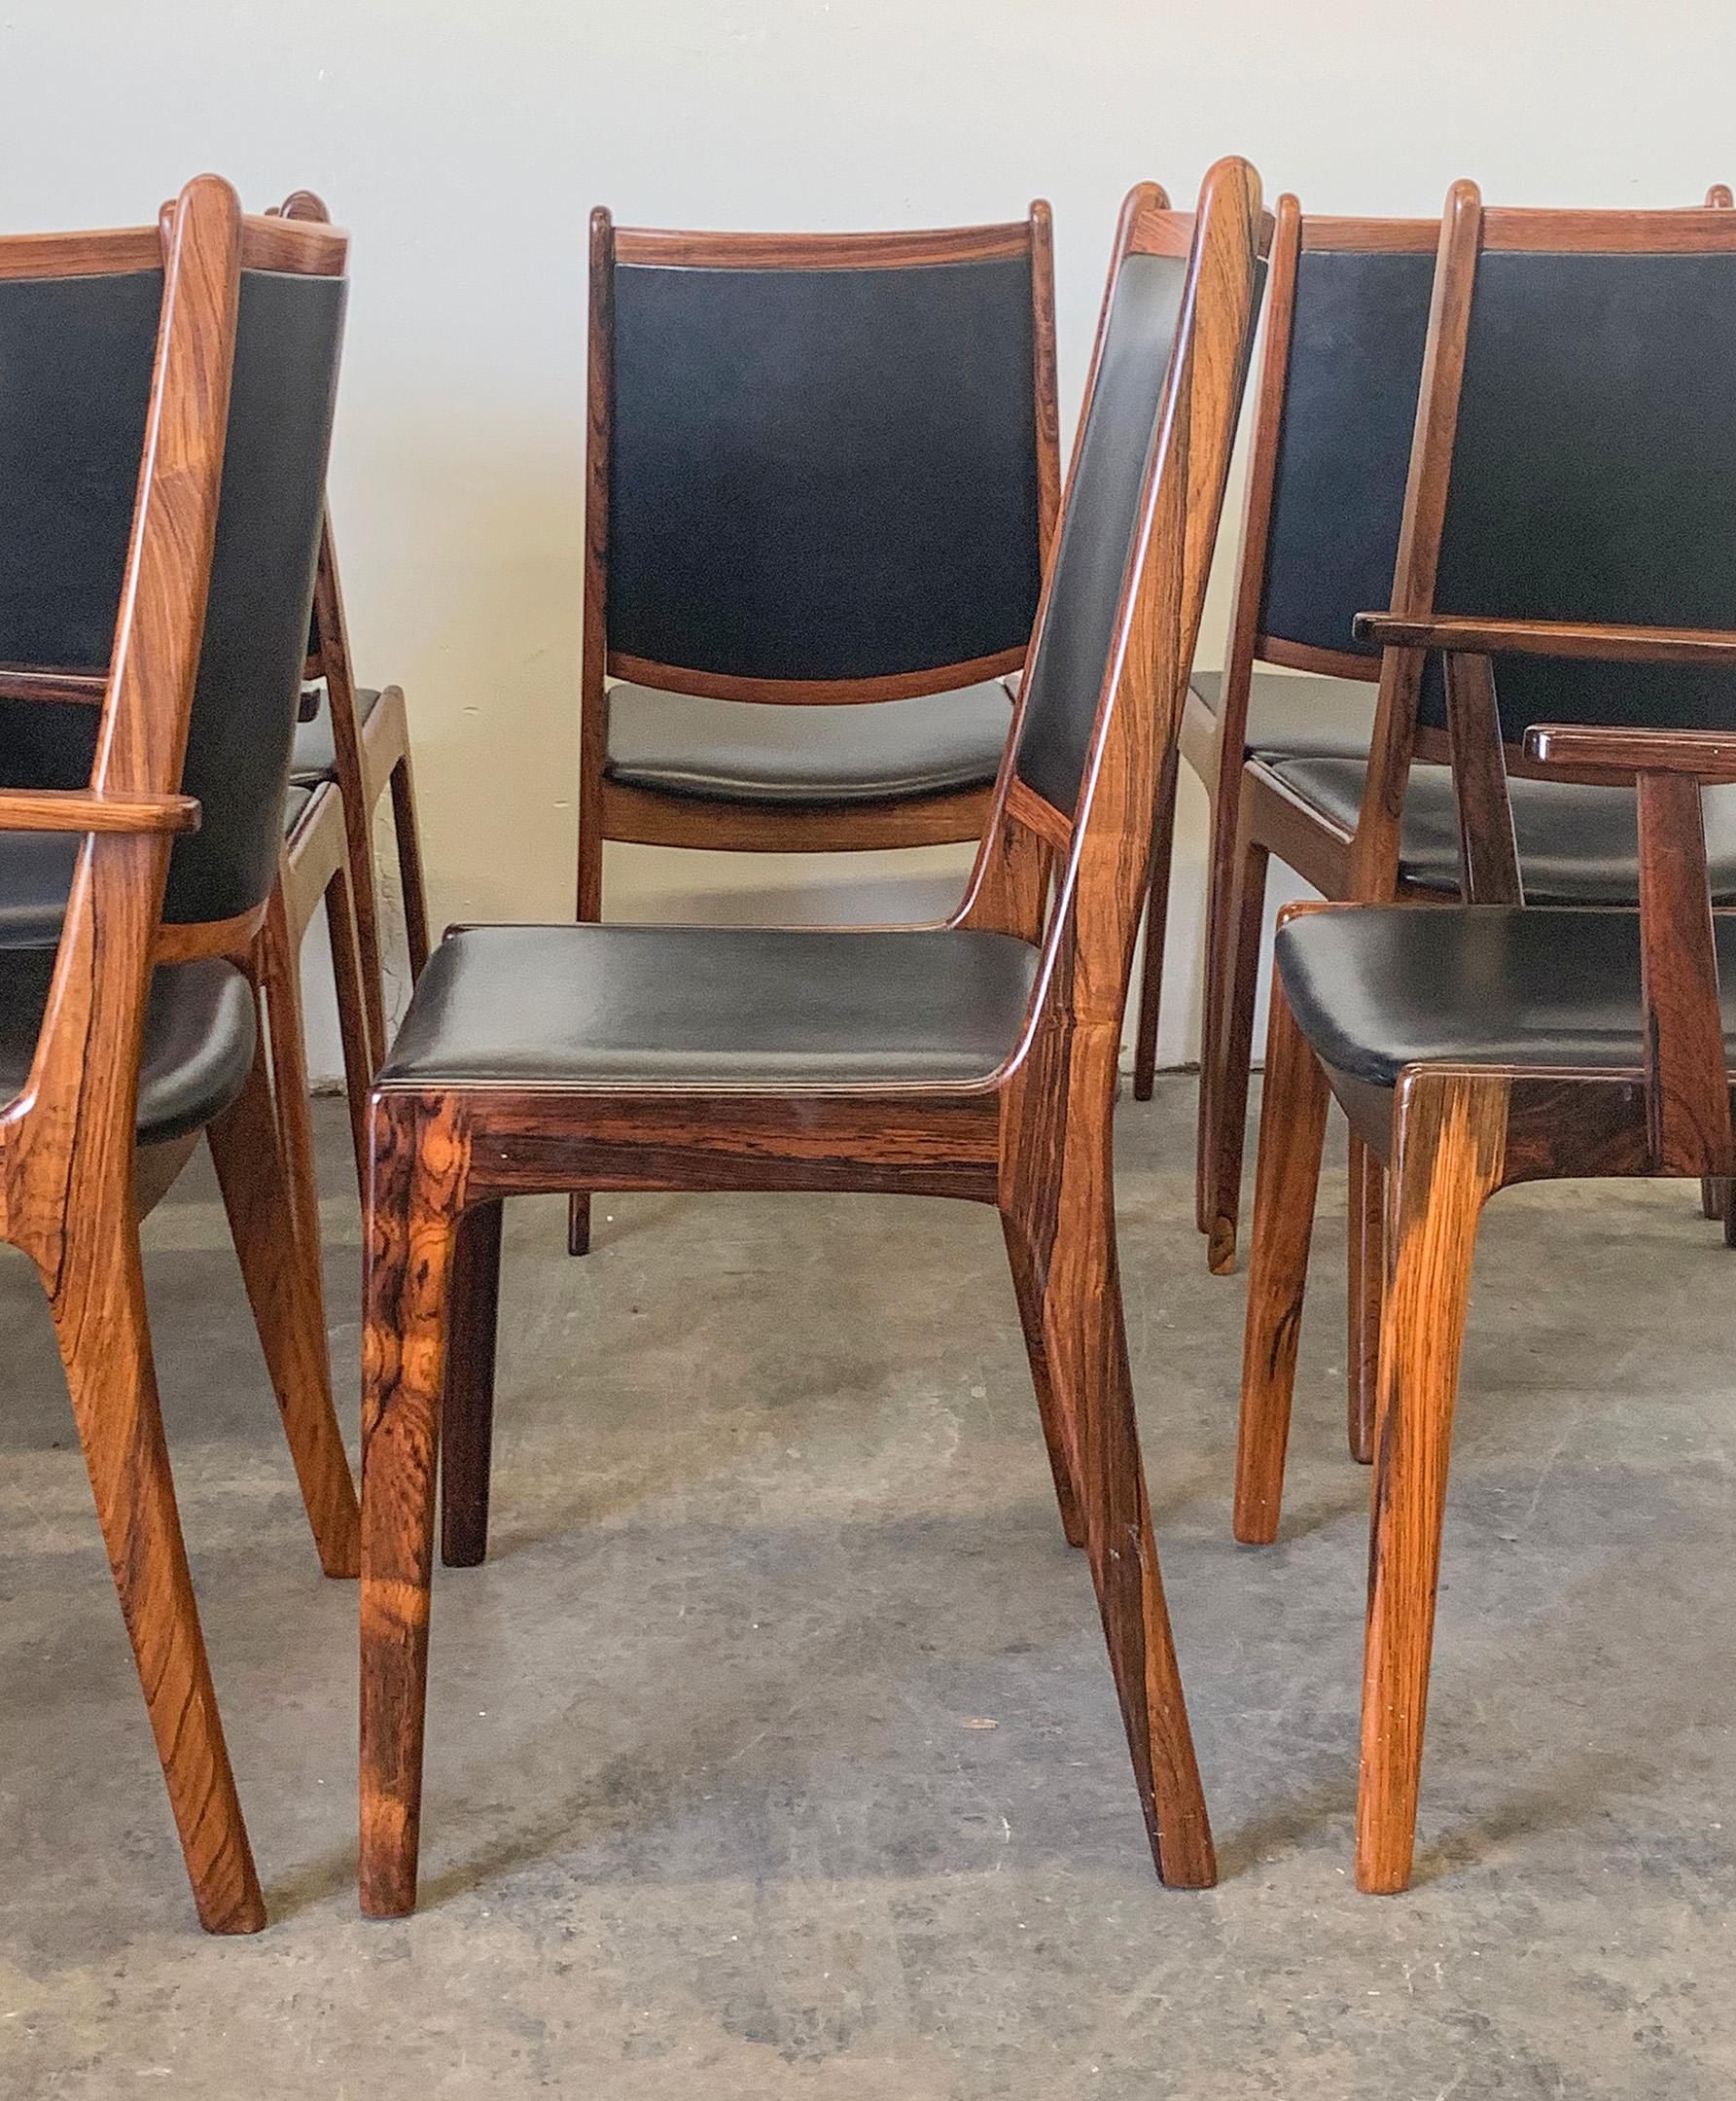 Available right now we have this stunning set of 8 Danish modern rosewood dining chairs. The rosewood grain on these chairs is absolutely stunning! Striking grain, and luxurious black leather make these chairs such sumptuous statement pieces.